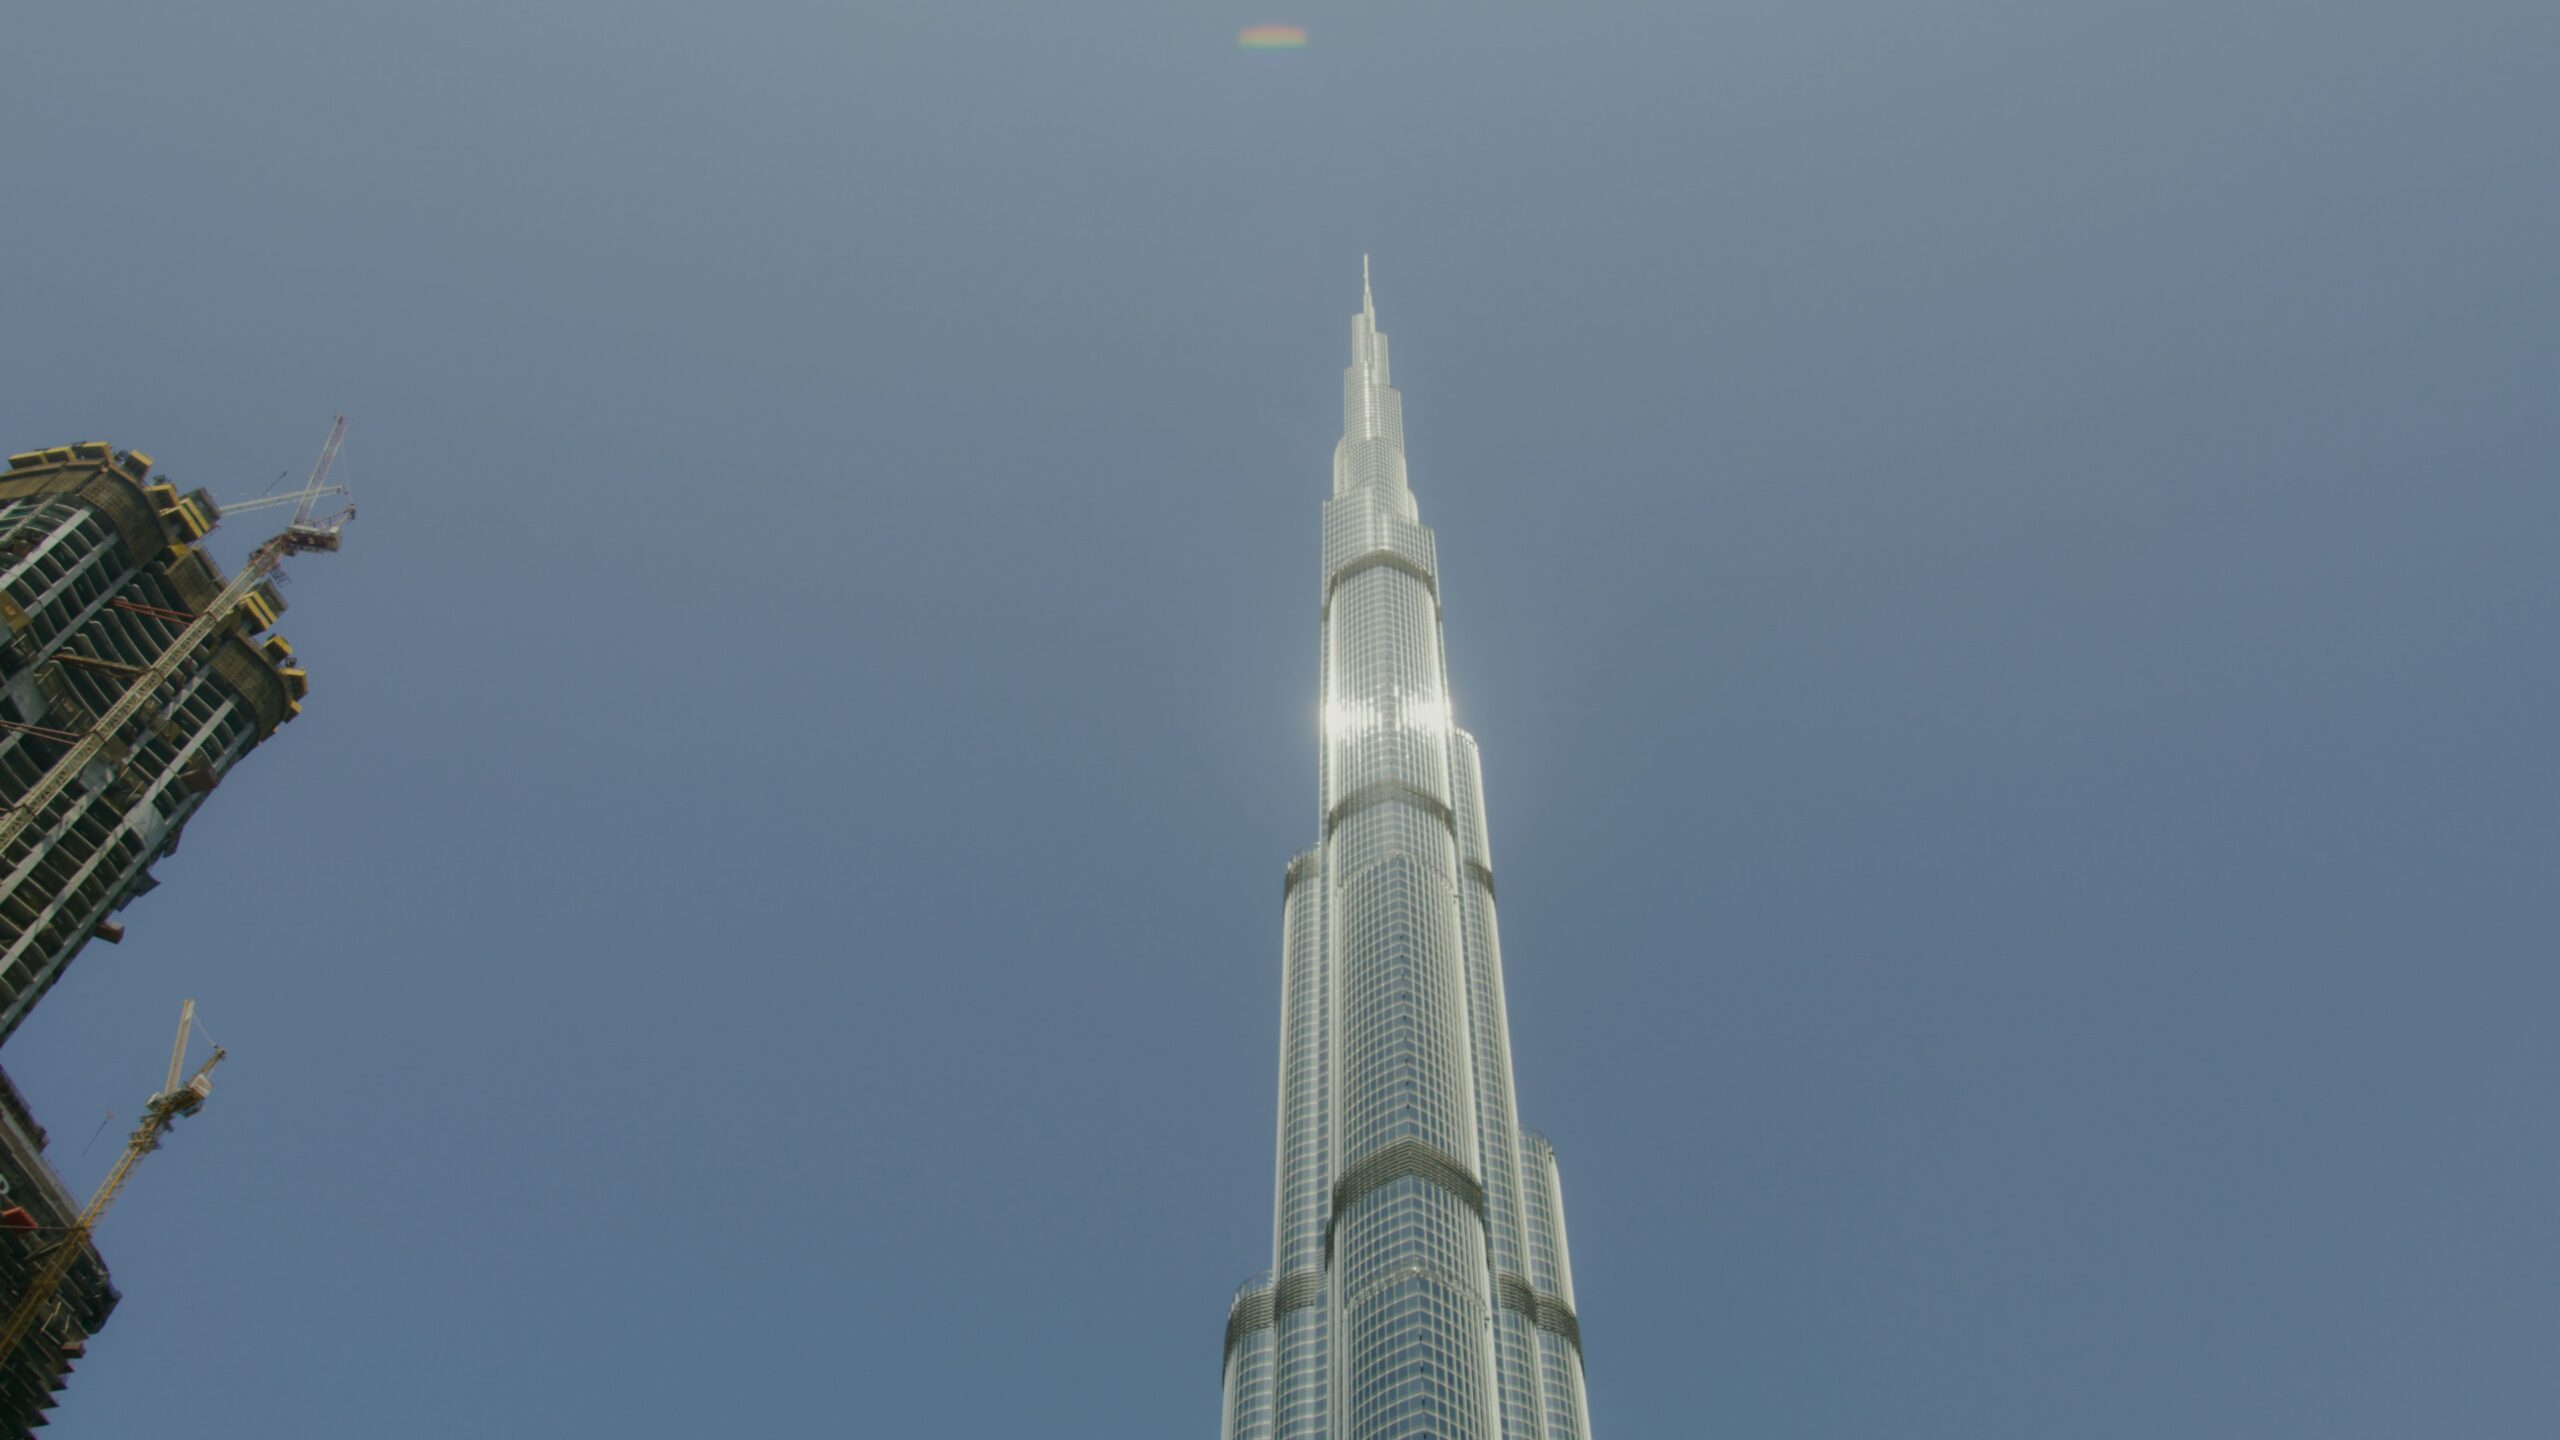 An image of the worlds tallest building, the Burj Khalifa